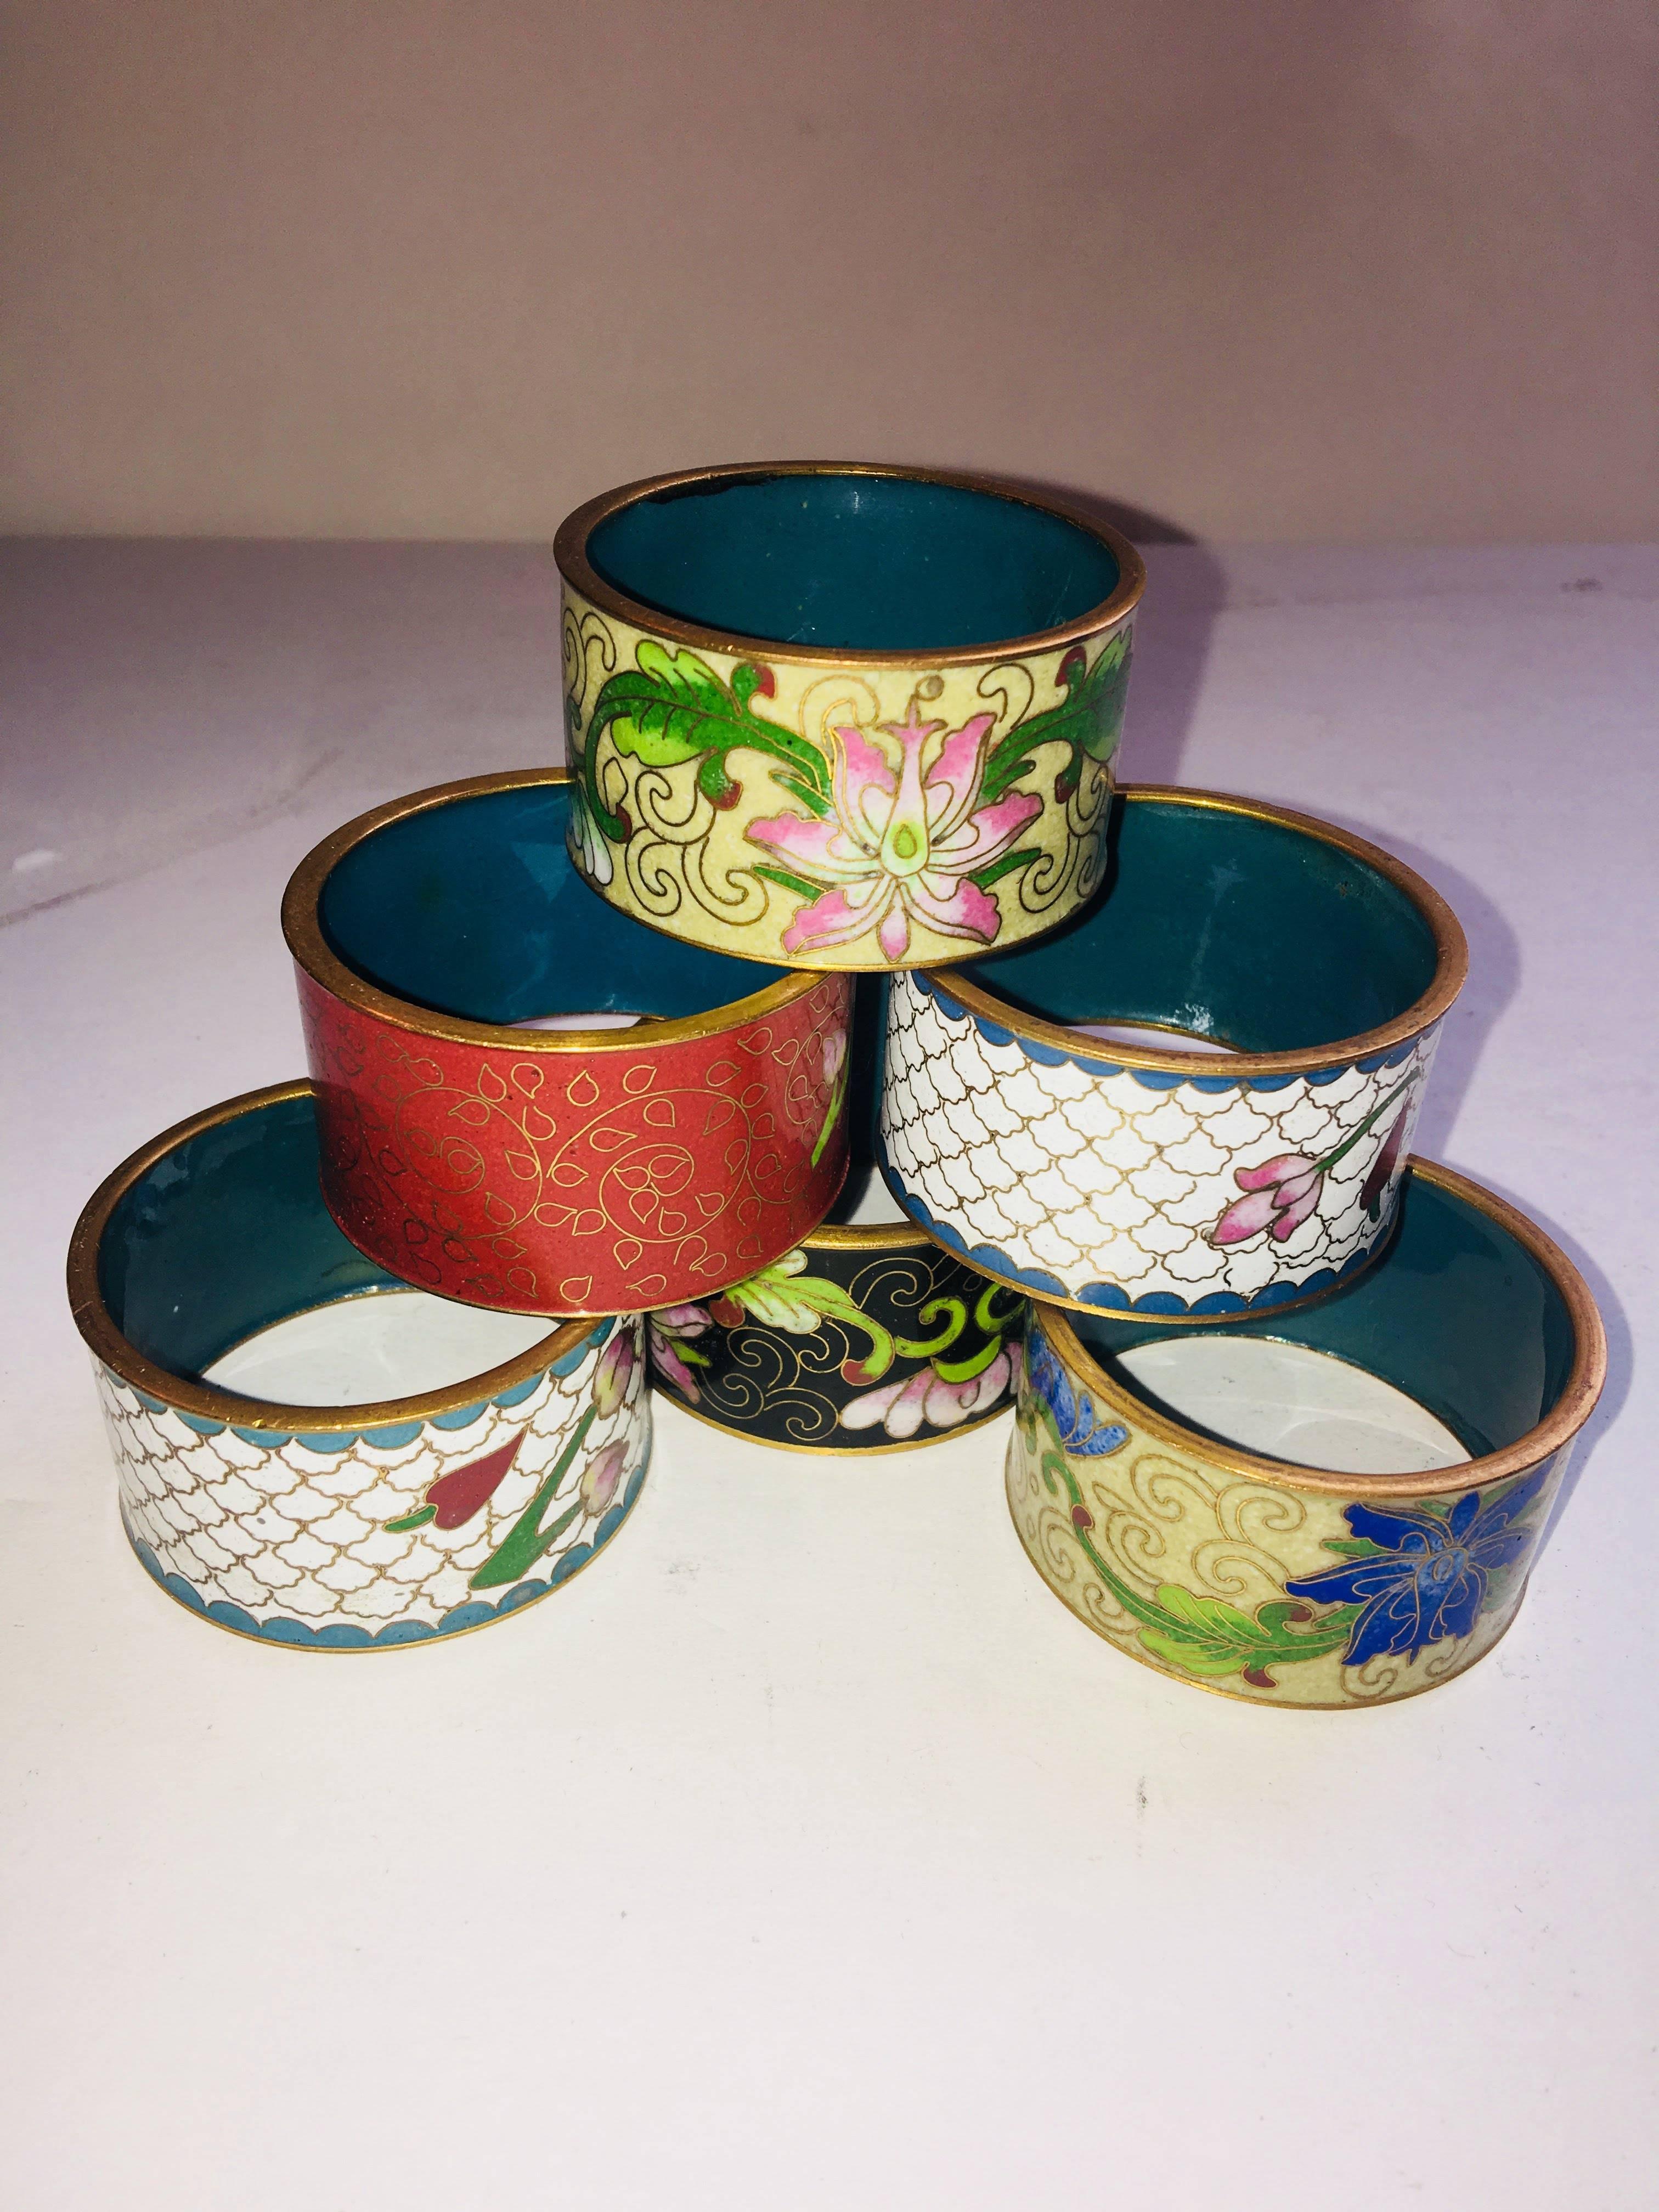 Set of six Chinese enamel napkin rings with different decorative designs on each.